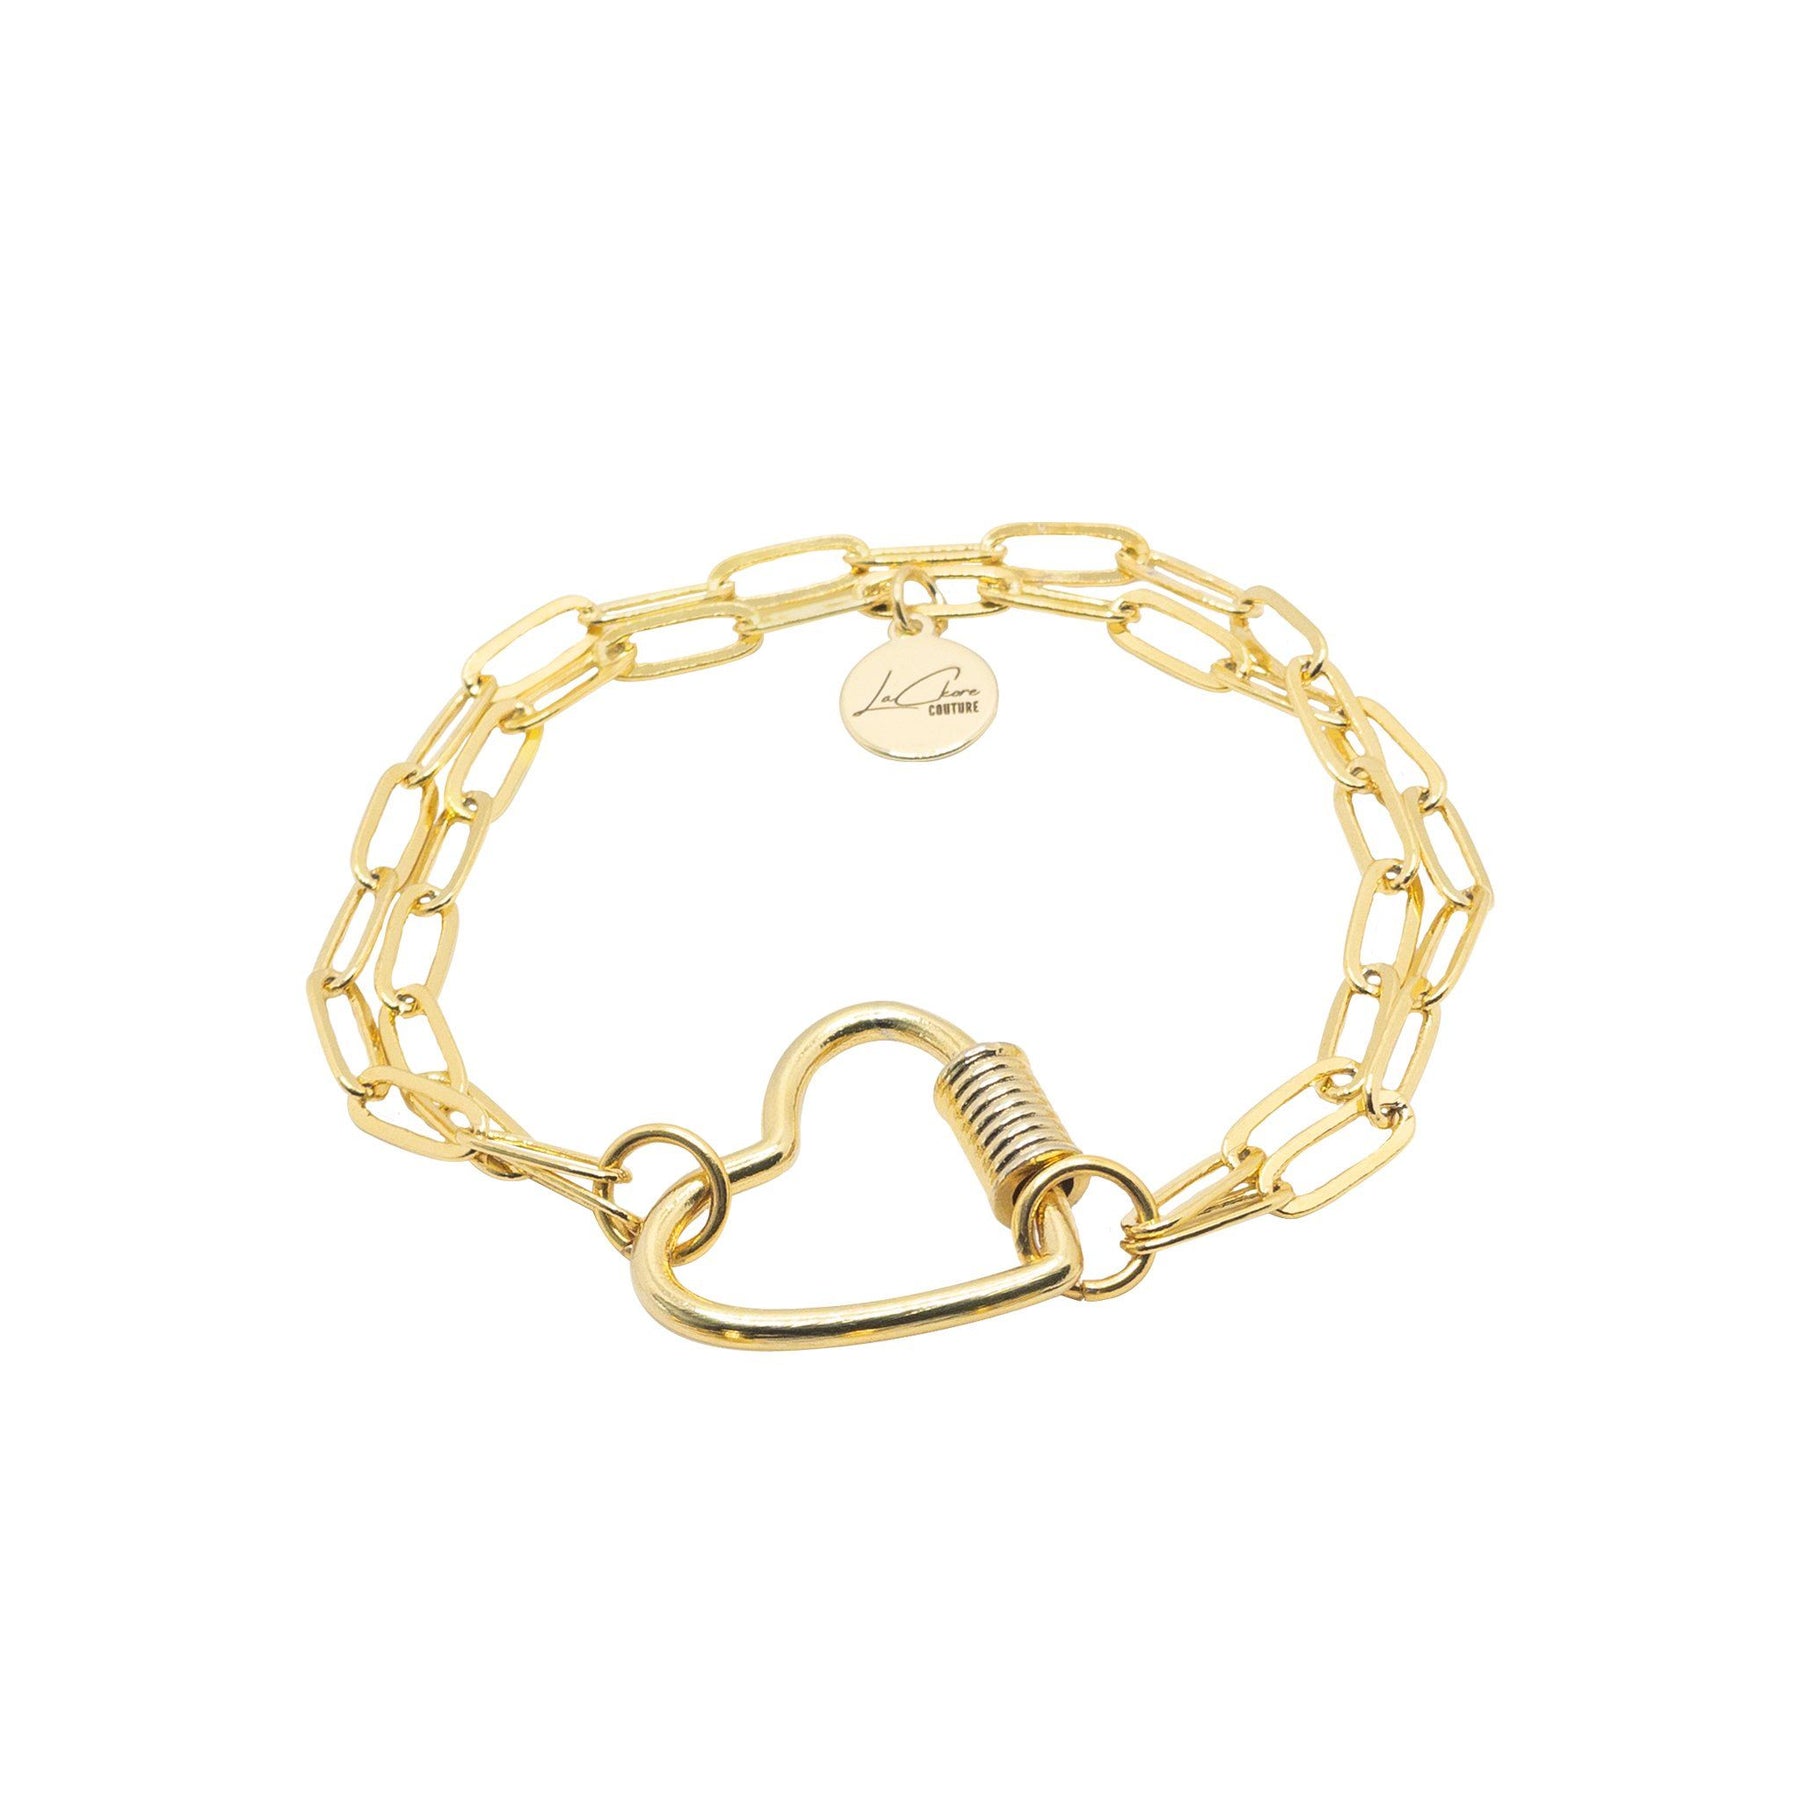 A gold charm bracelet with a heart shaped lock